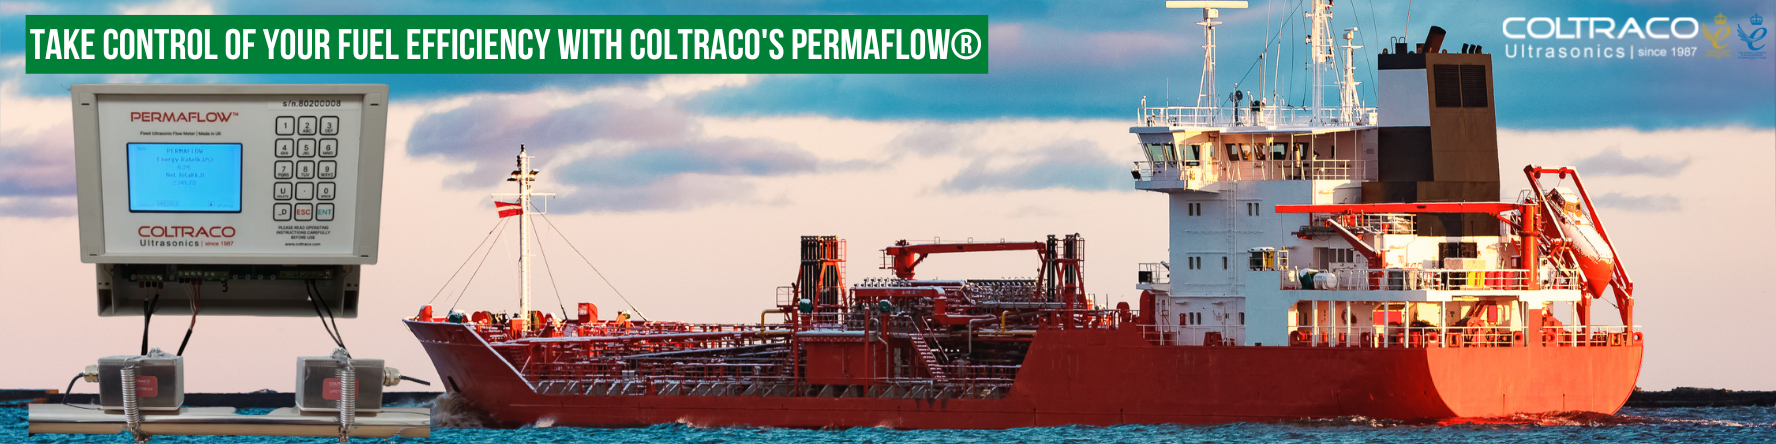 Take Control of Your Fuel Efficiency with Coltraco's Permaflow®